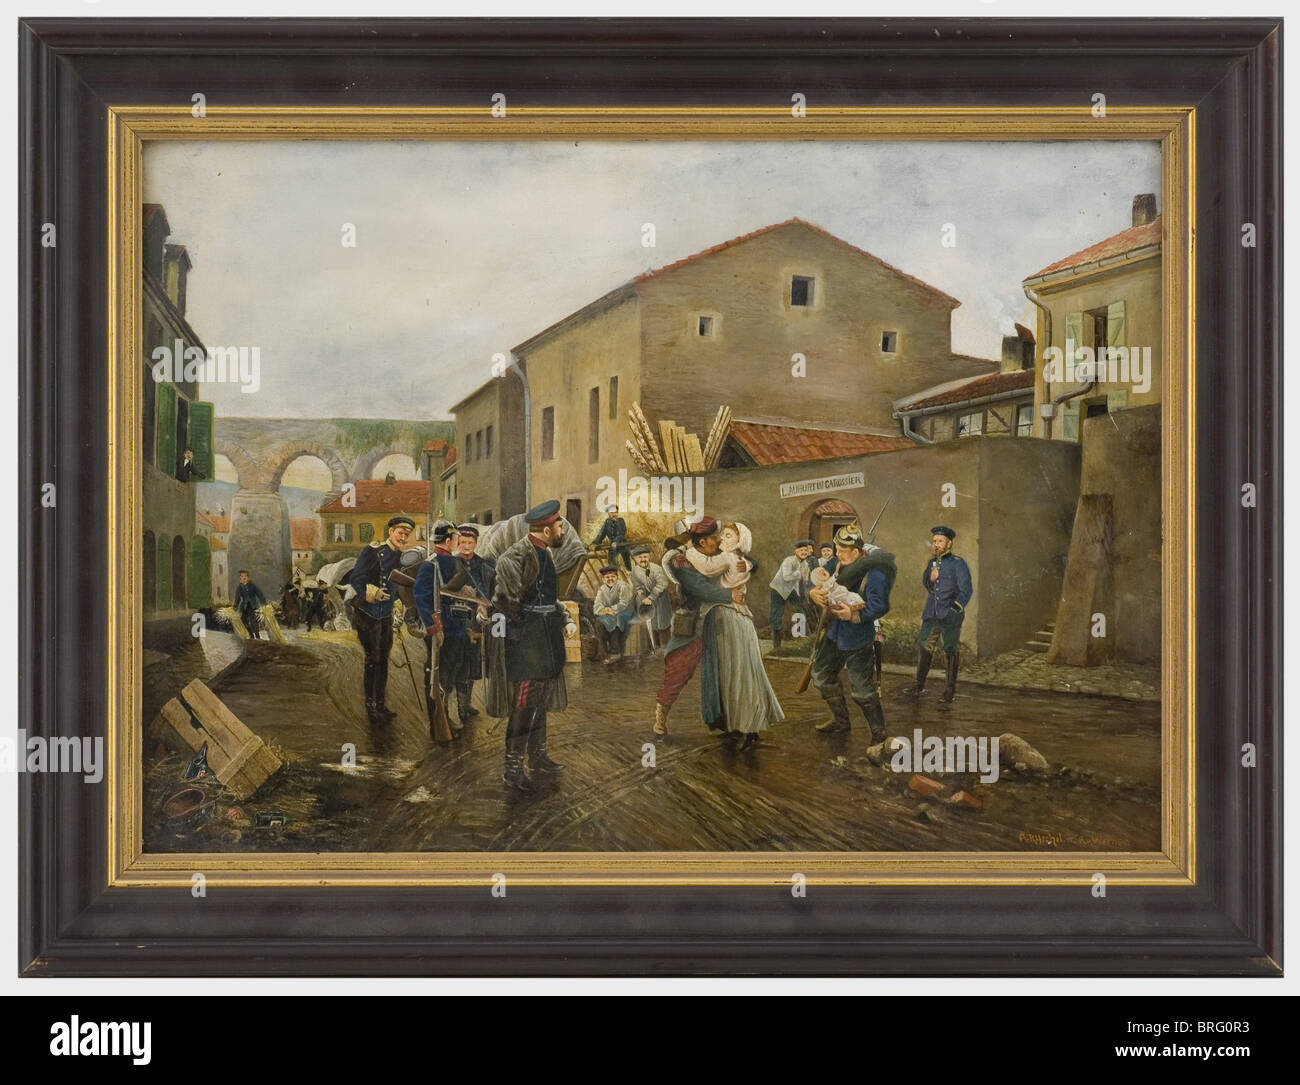 Taken captive,oil on sheet iron. Scene from the Franco-German War after the painting by Anton von Werner. In the foreground a farewell scene,attended by German soldiers from different branches of service. Signed on the lower right 'A. Ritschel nach A. v. Werner'. In profile trim frame. Picture size 50 x 35 cm,framed 60 x 46 cm. In his painting from 1870,Werner exemplarily portrays the story of the noble German trooper in the field. historic,historical,people,19th century,Prussian,Prussia,German,Germany,militaria,military,object,objects,stills,c,Additional-Rights-Clearences-Not Available Stock Photo